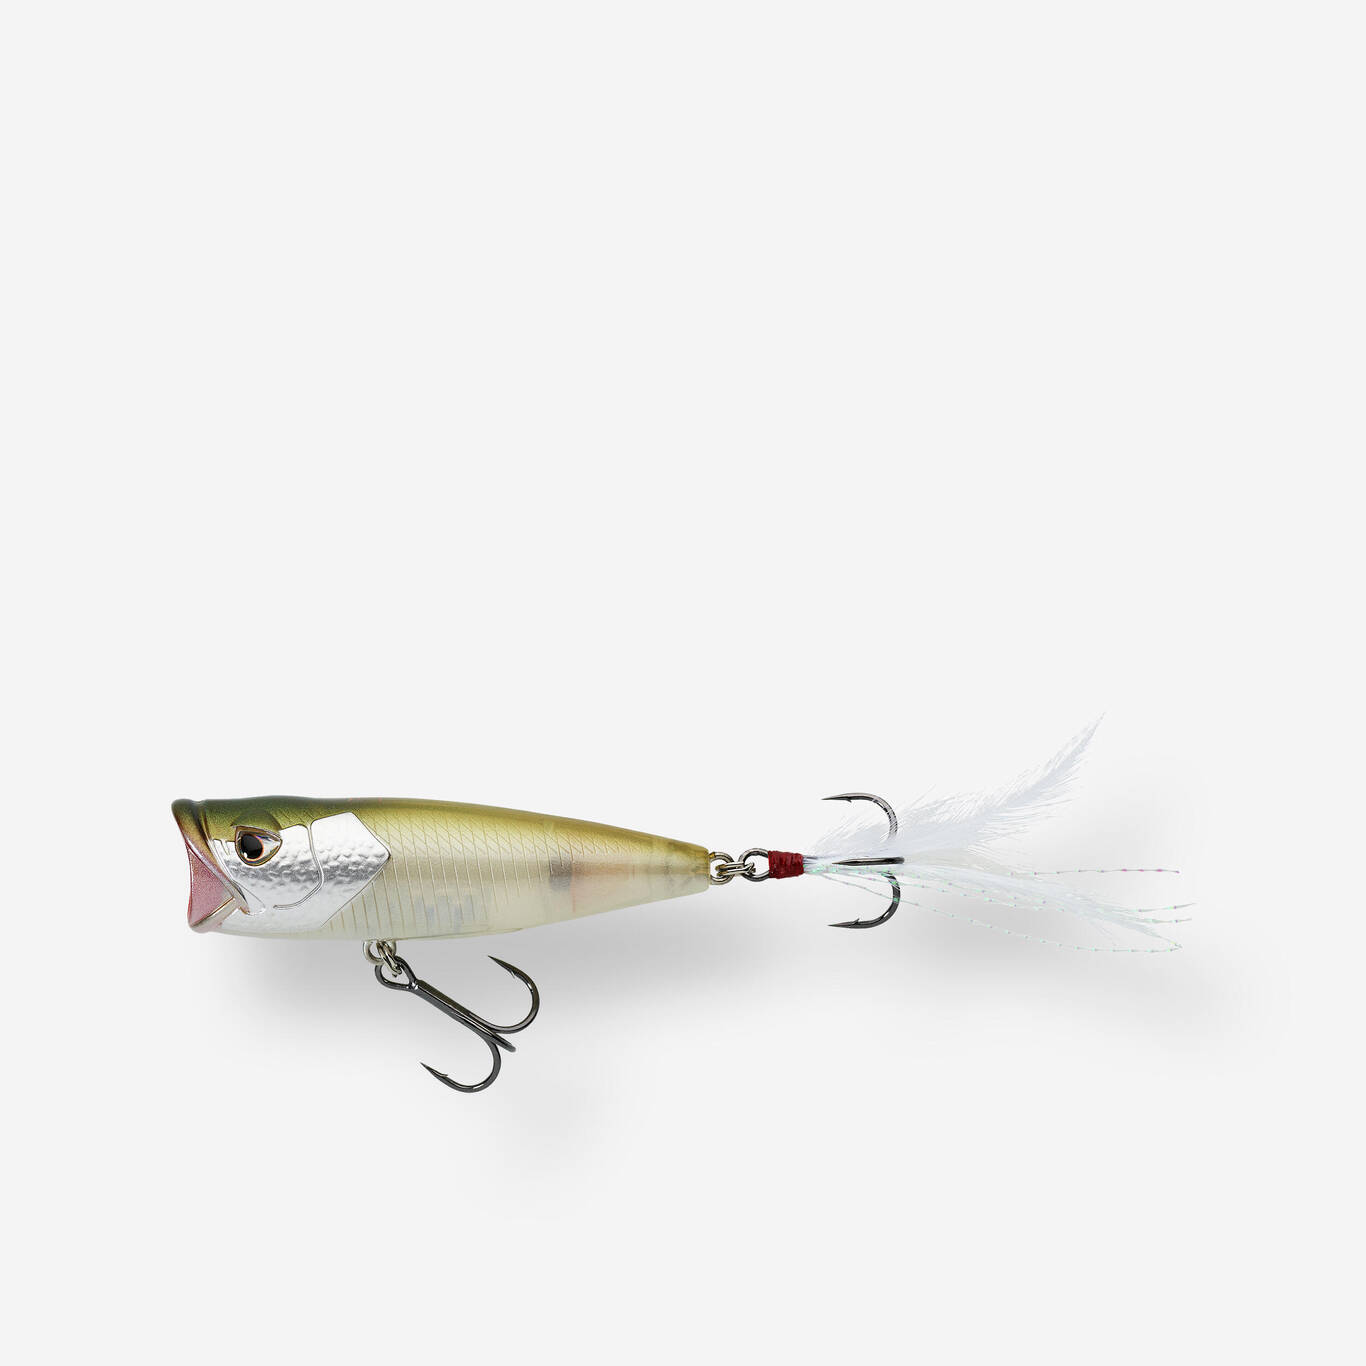 Tools of the trade. What are your favorite hard baits? : r/SurfFishing